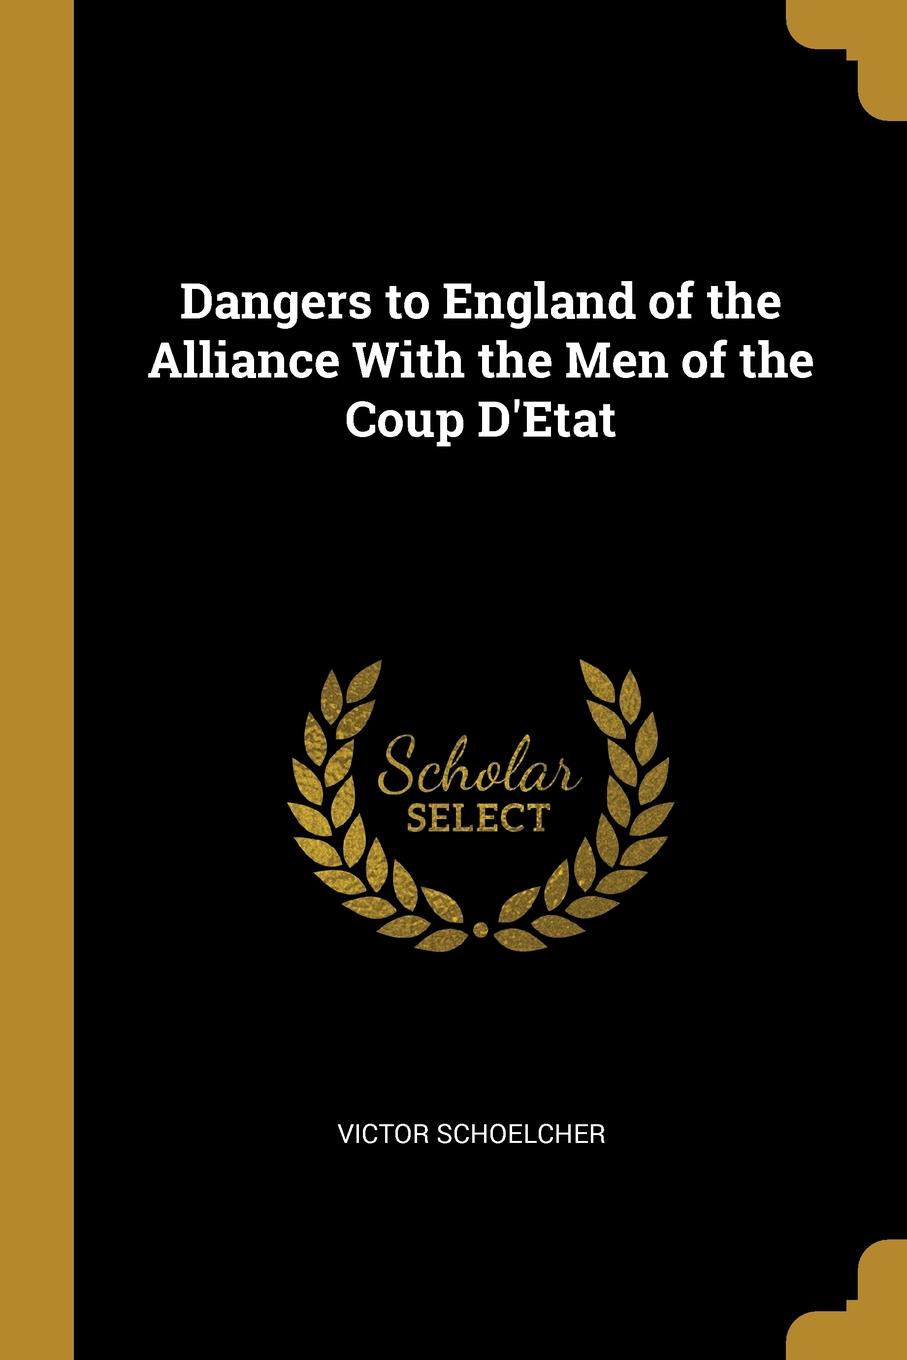 Dangers to England of the Alliance With the Men of the Coup D.Etat